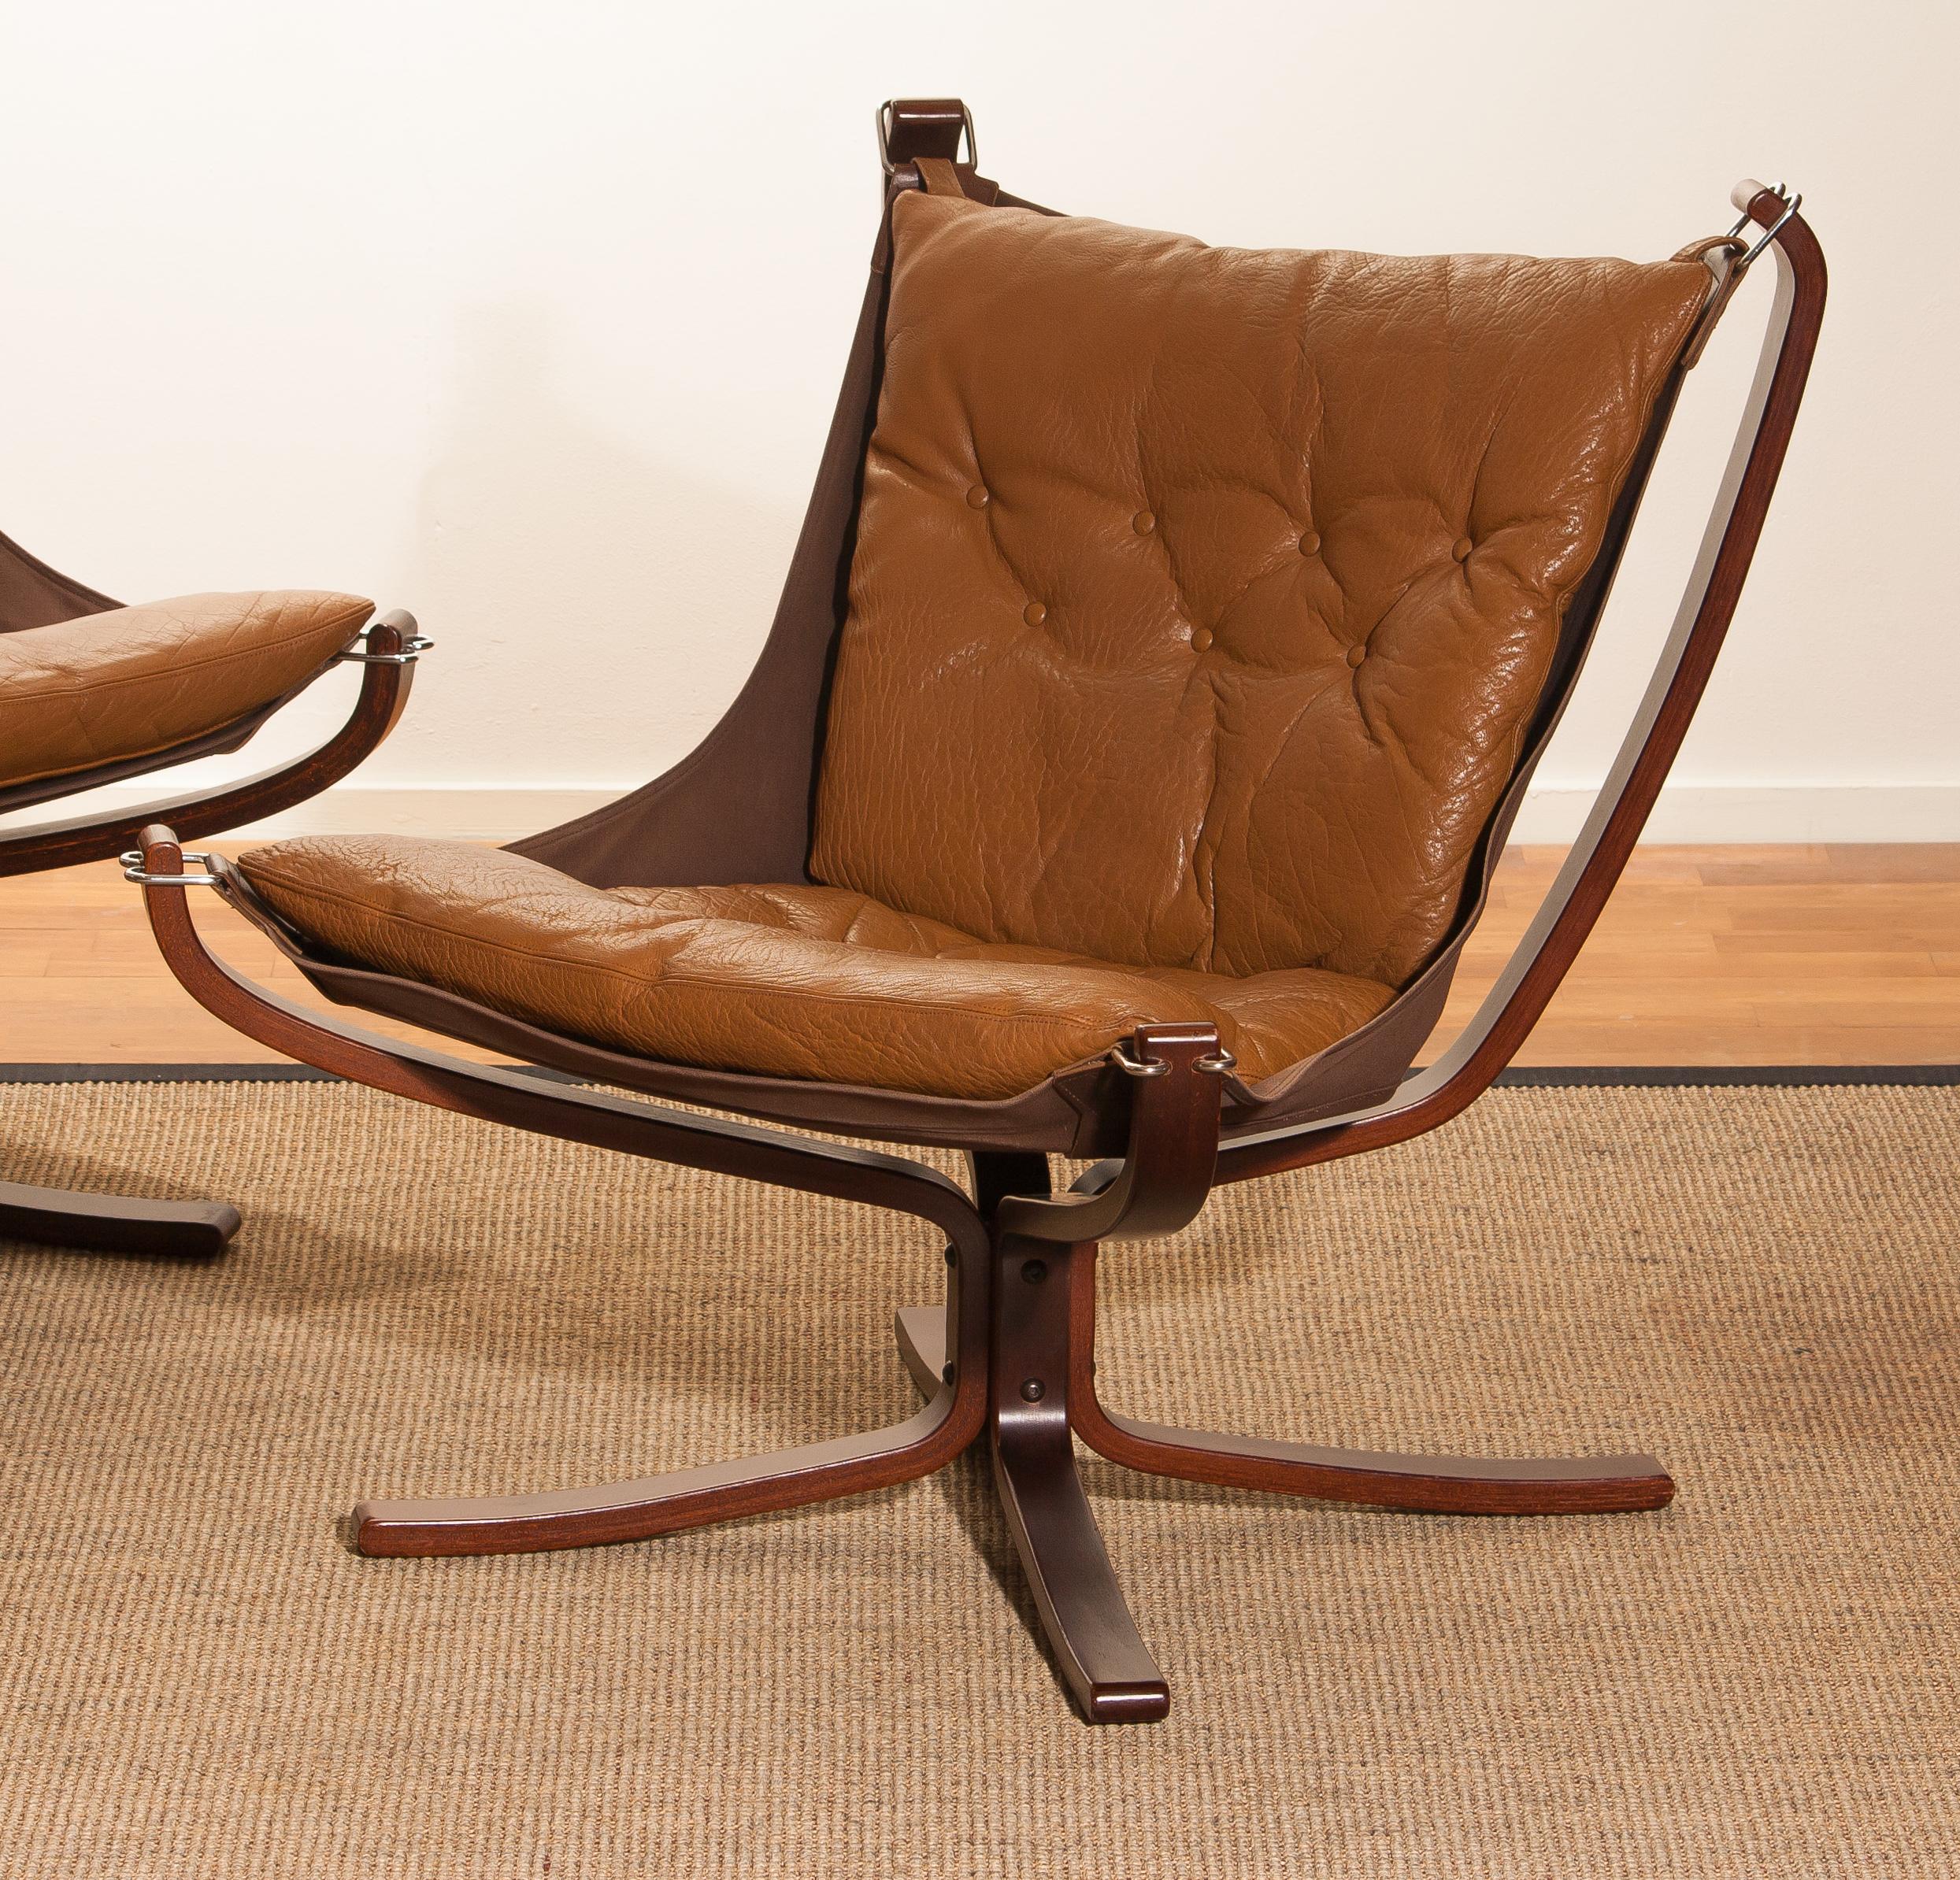 Extremely beautiful set of three lounge chairs / easy chairs. All designed by Sigurd Ressell Norway.
The three chairs are in very good original condition. 
The camel leather seating as the wooden frames are all in perfect condition.

Period